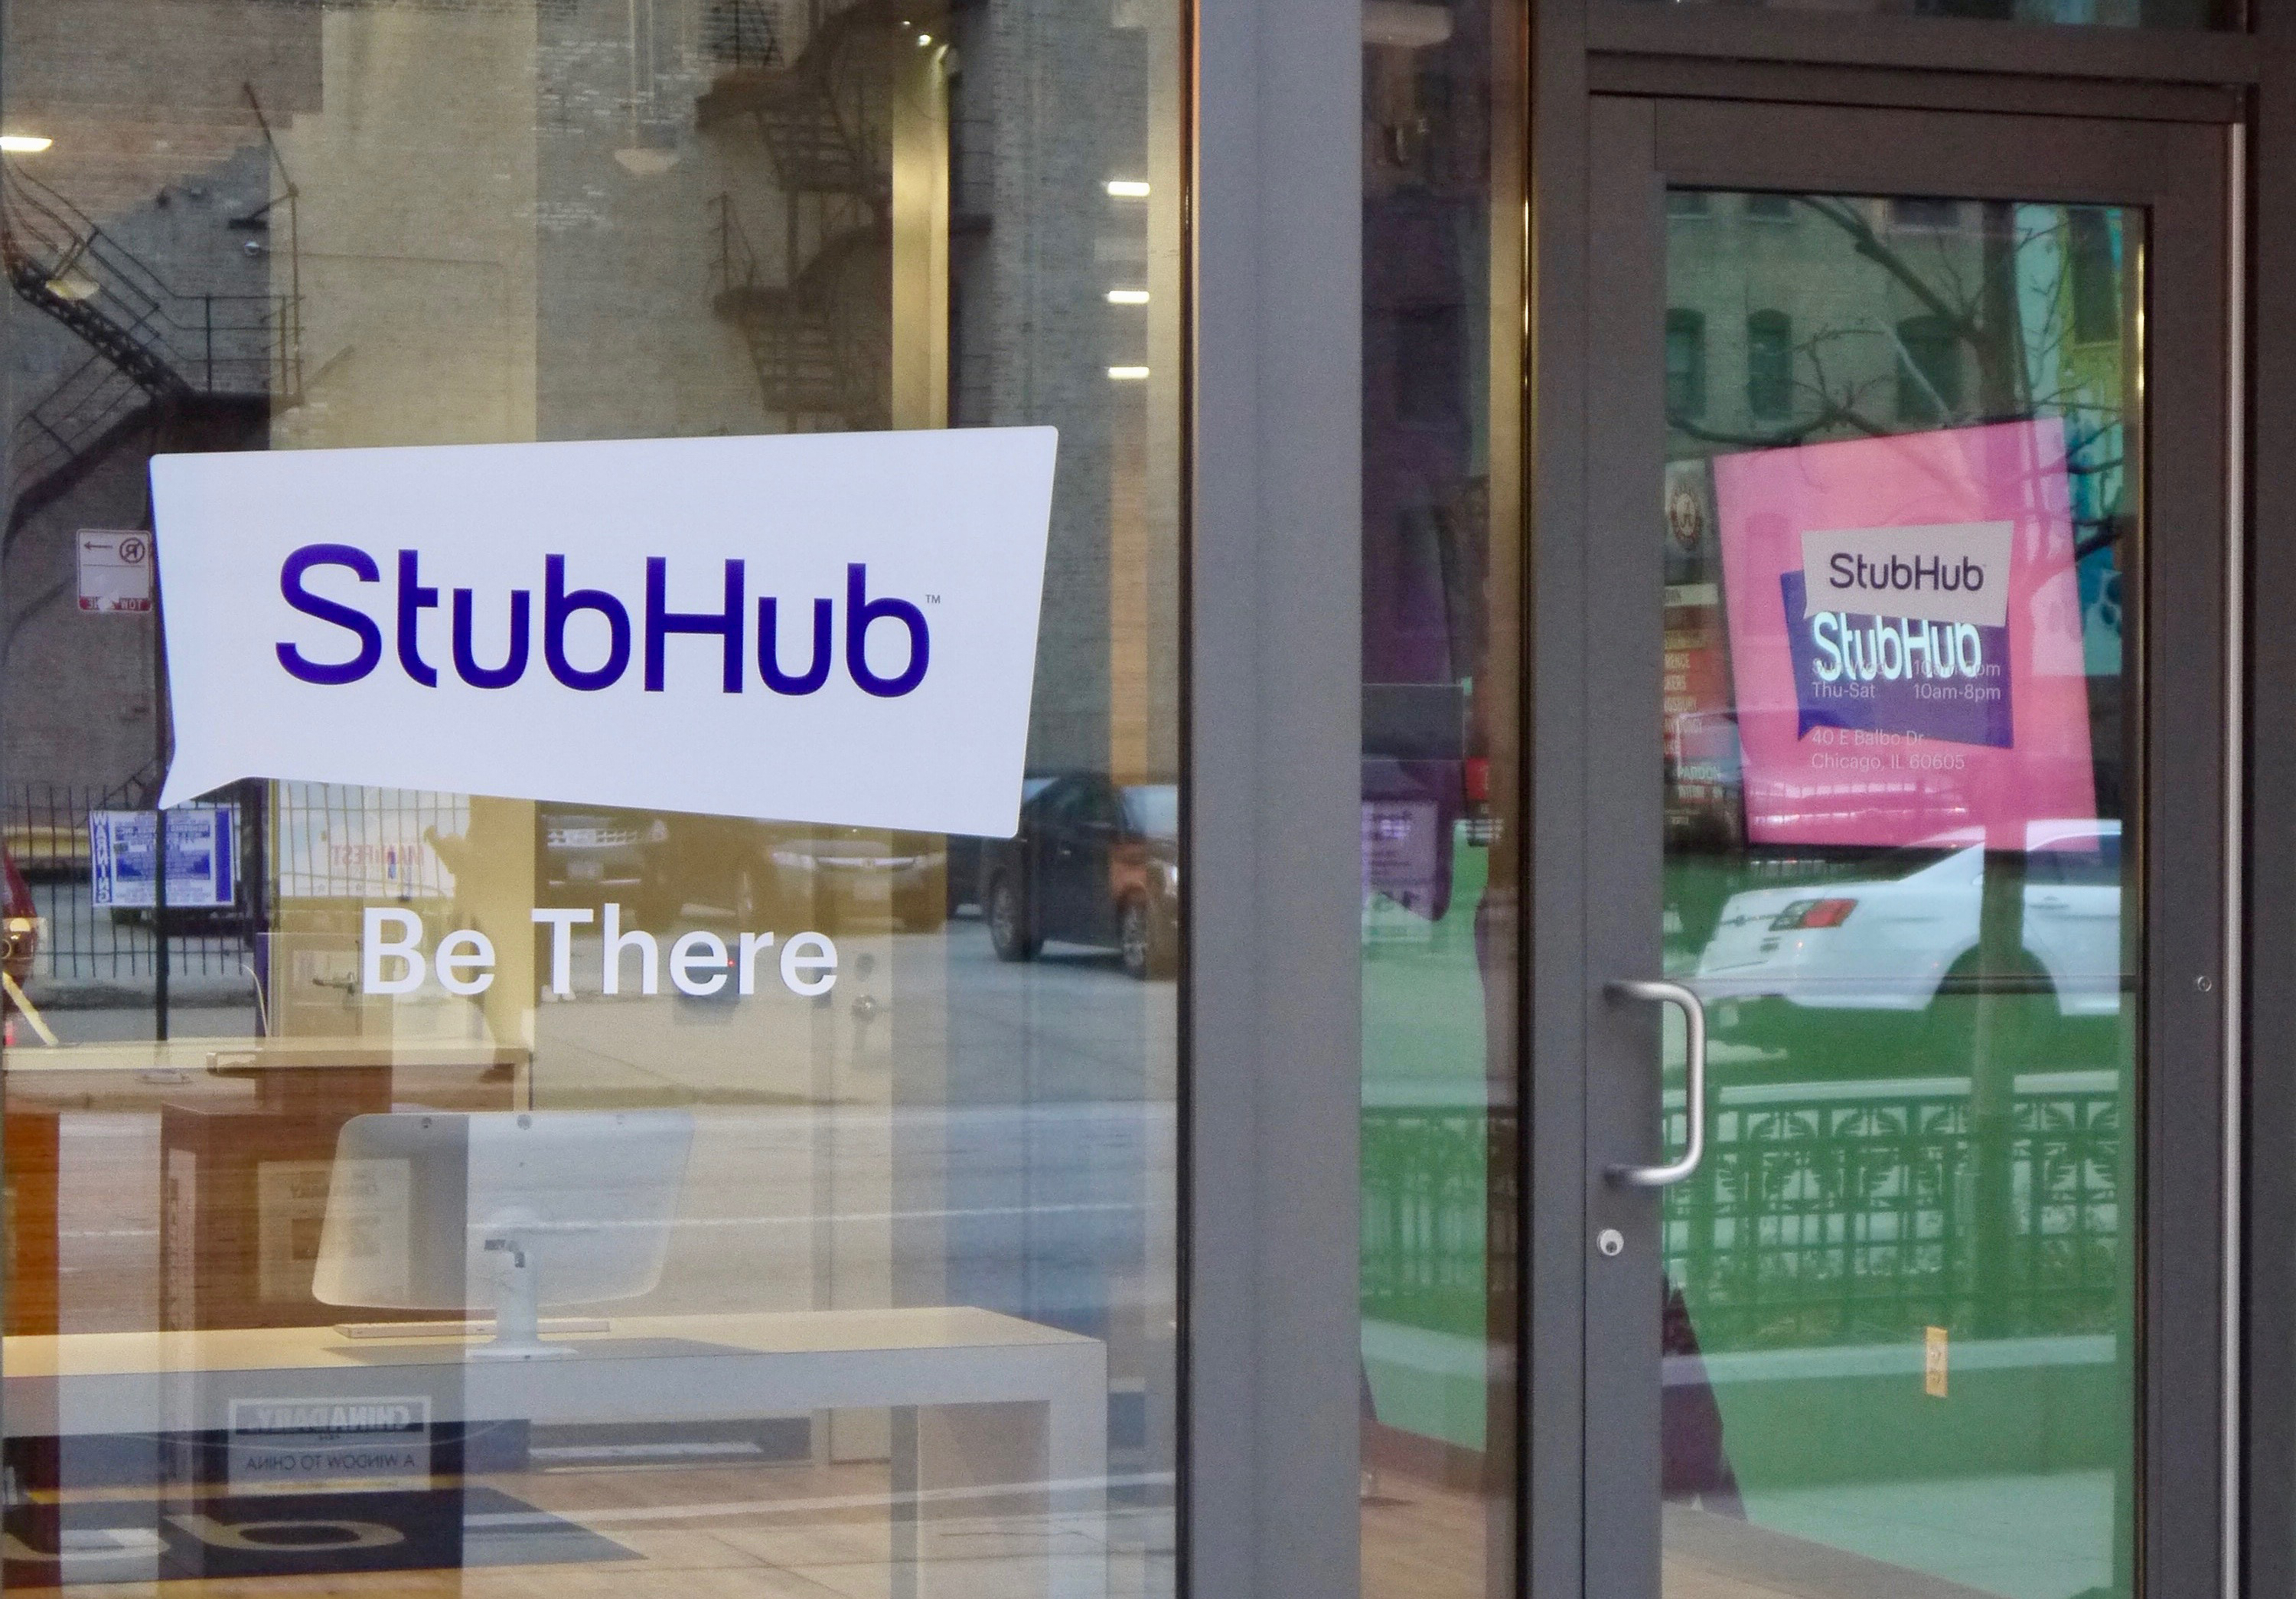 StubHub said they'd refund canceled tickets, but now they're taking